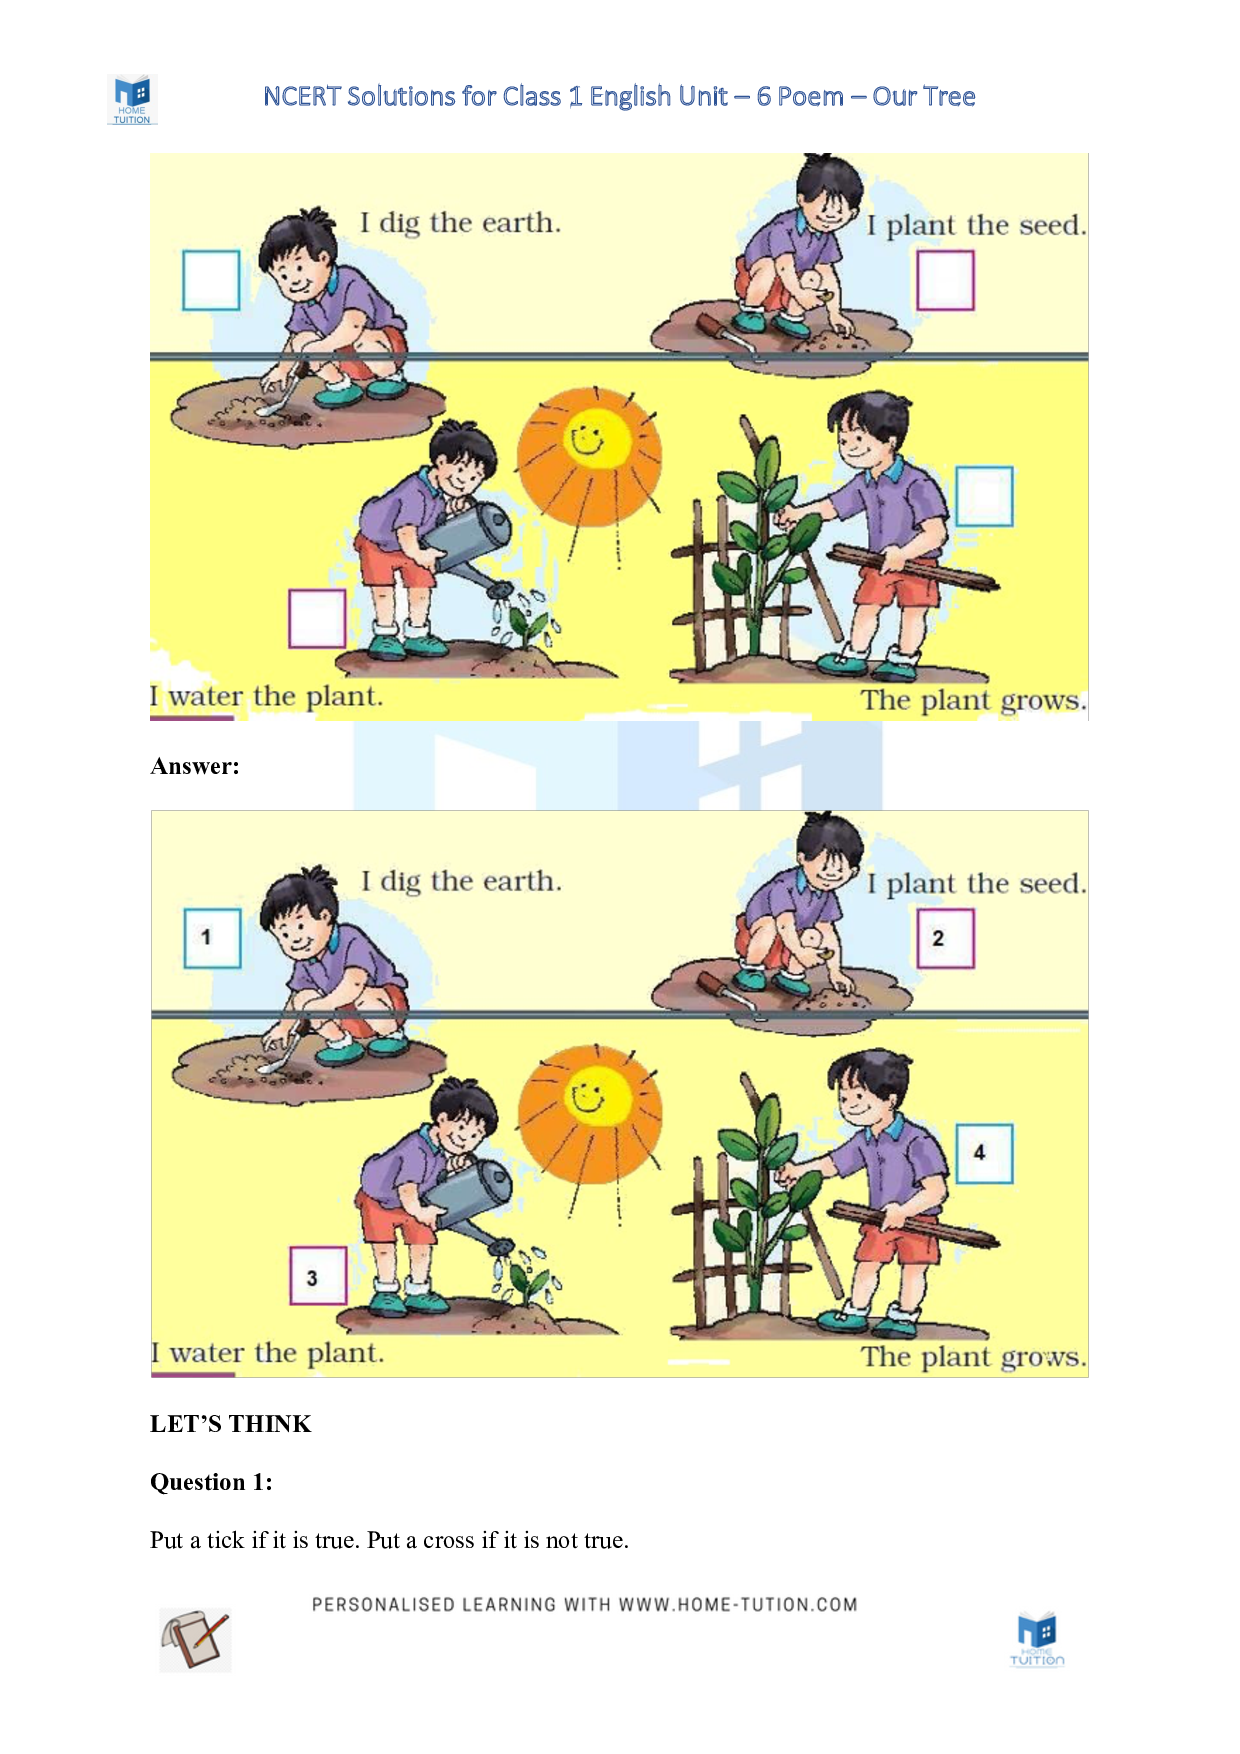 NCERT Solutions for Class 1 English Unit 6 Poem - Our Tree